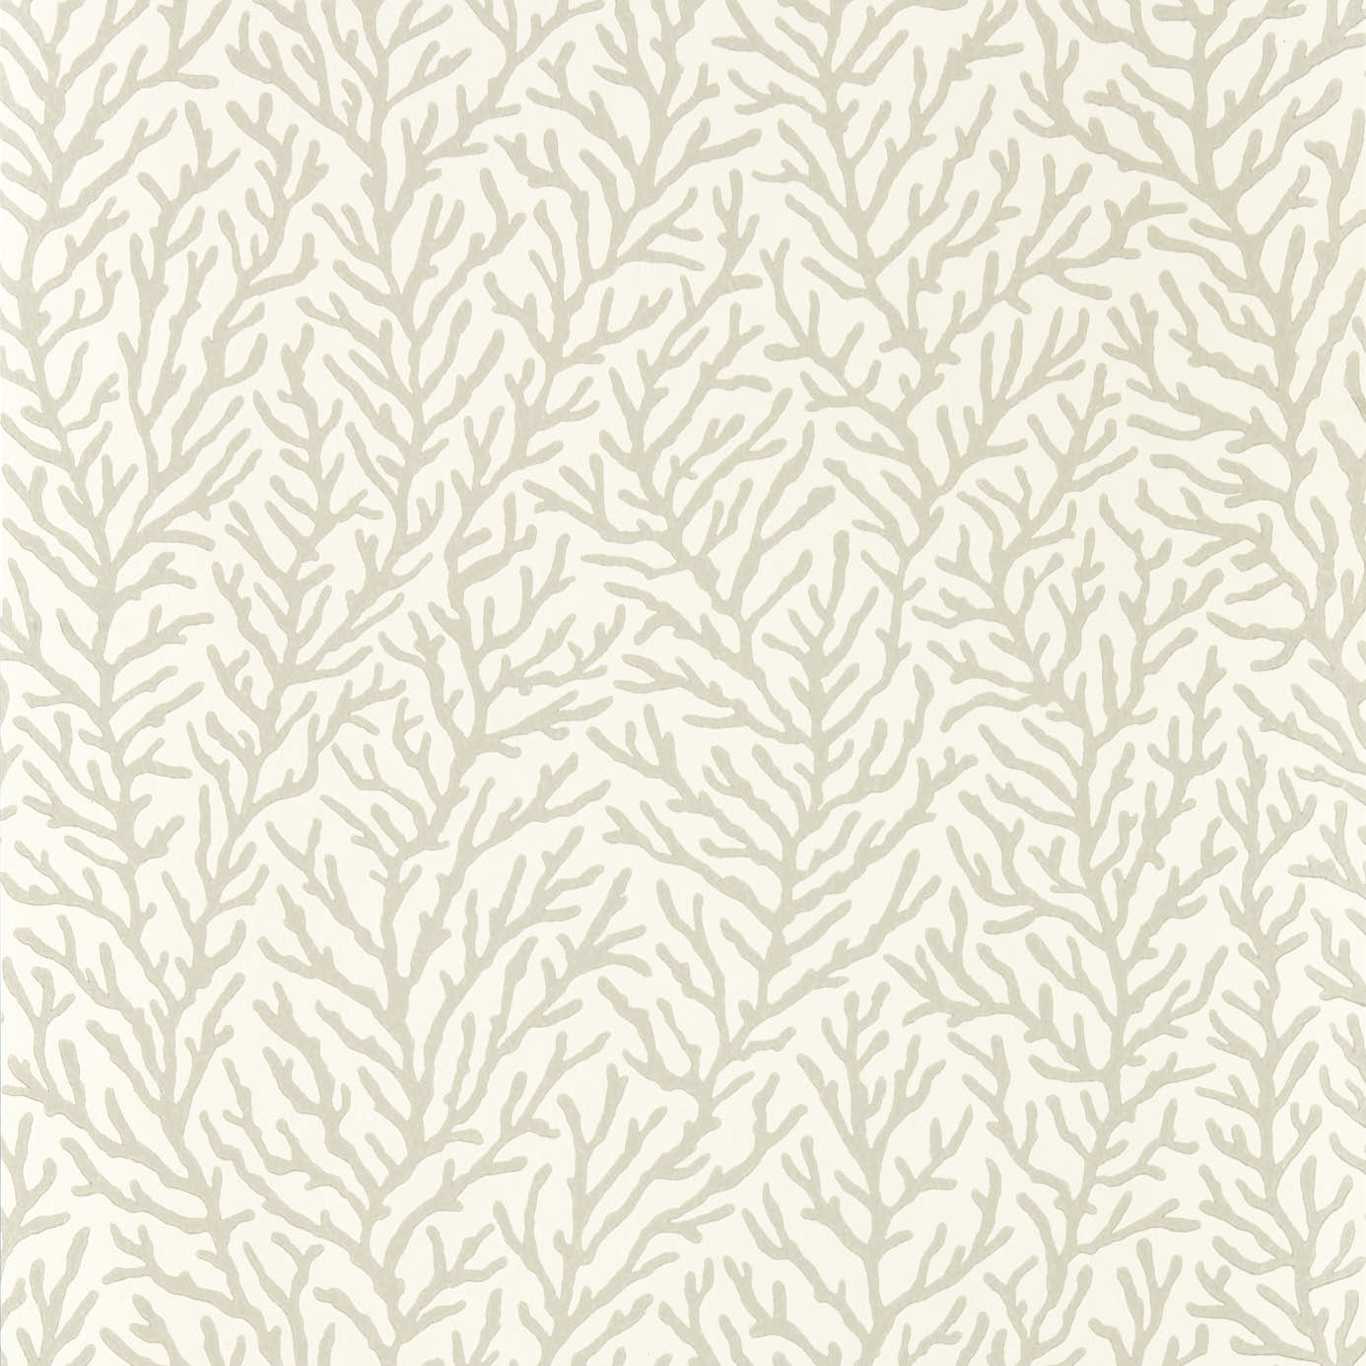 Atoll Awakening/Diffused Light Wallpaper HTEW112770 by Harlequin